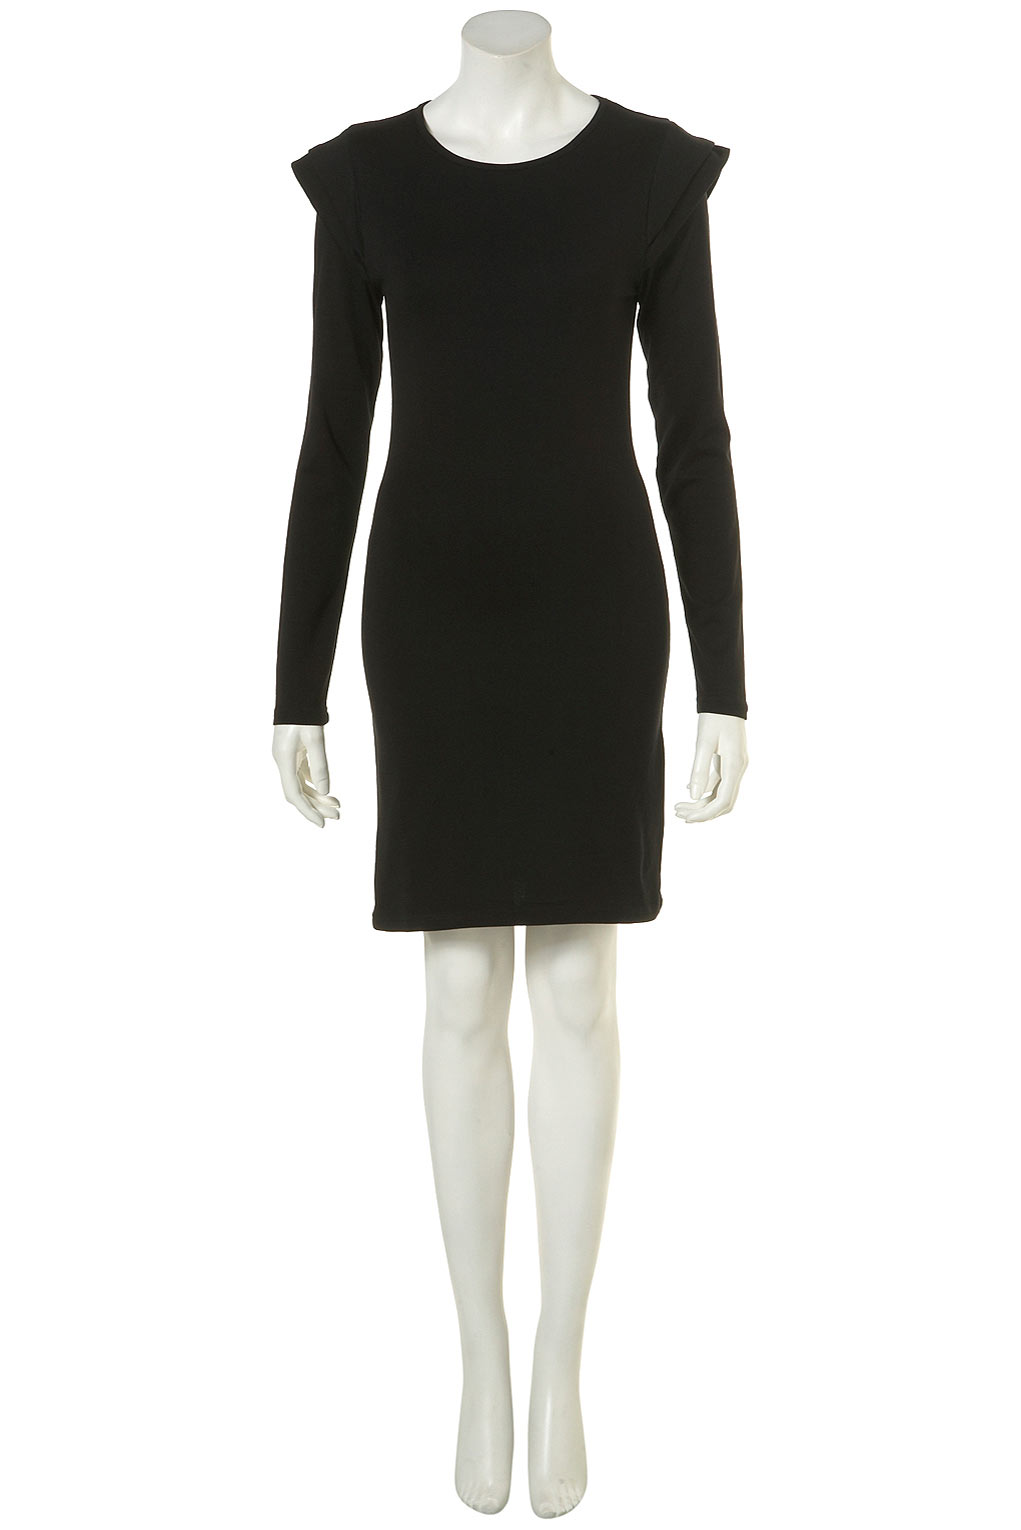 Fashion is A Lifestyle: The Little Black Winter Dress